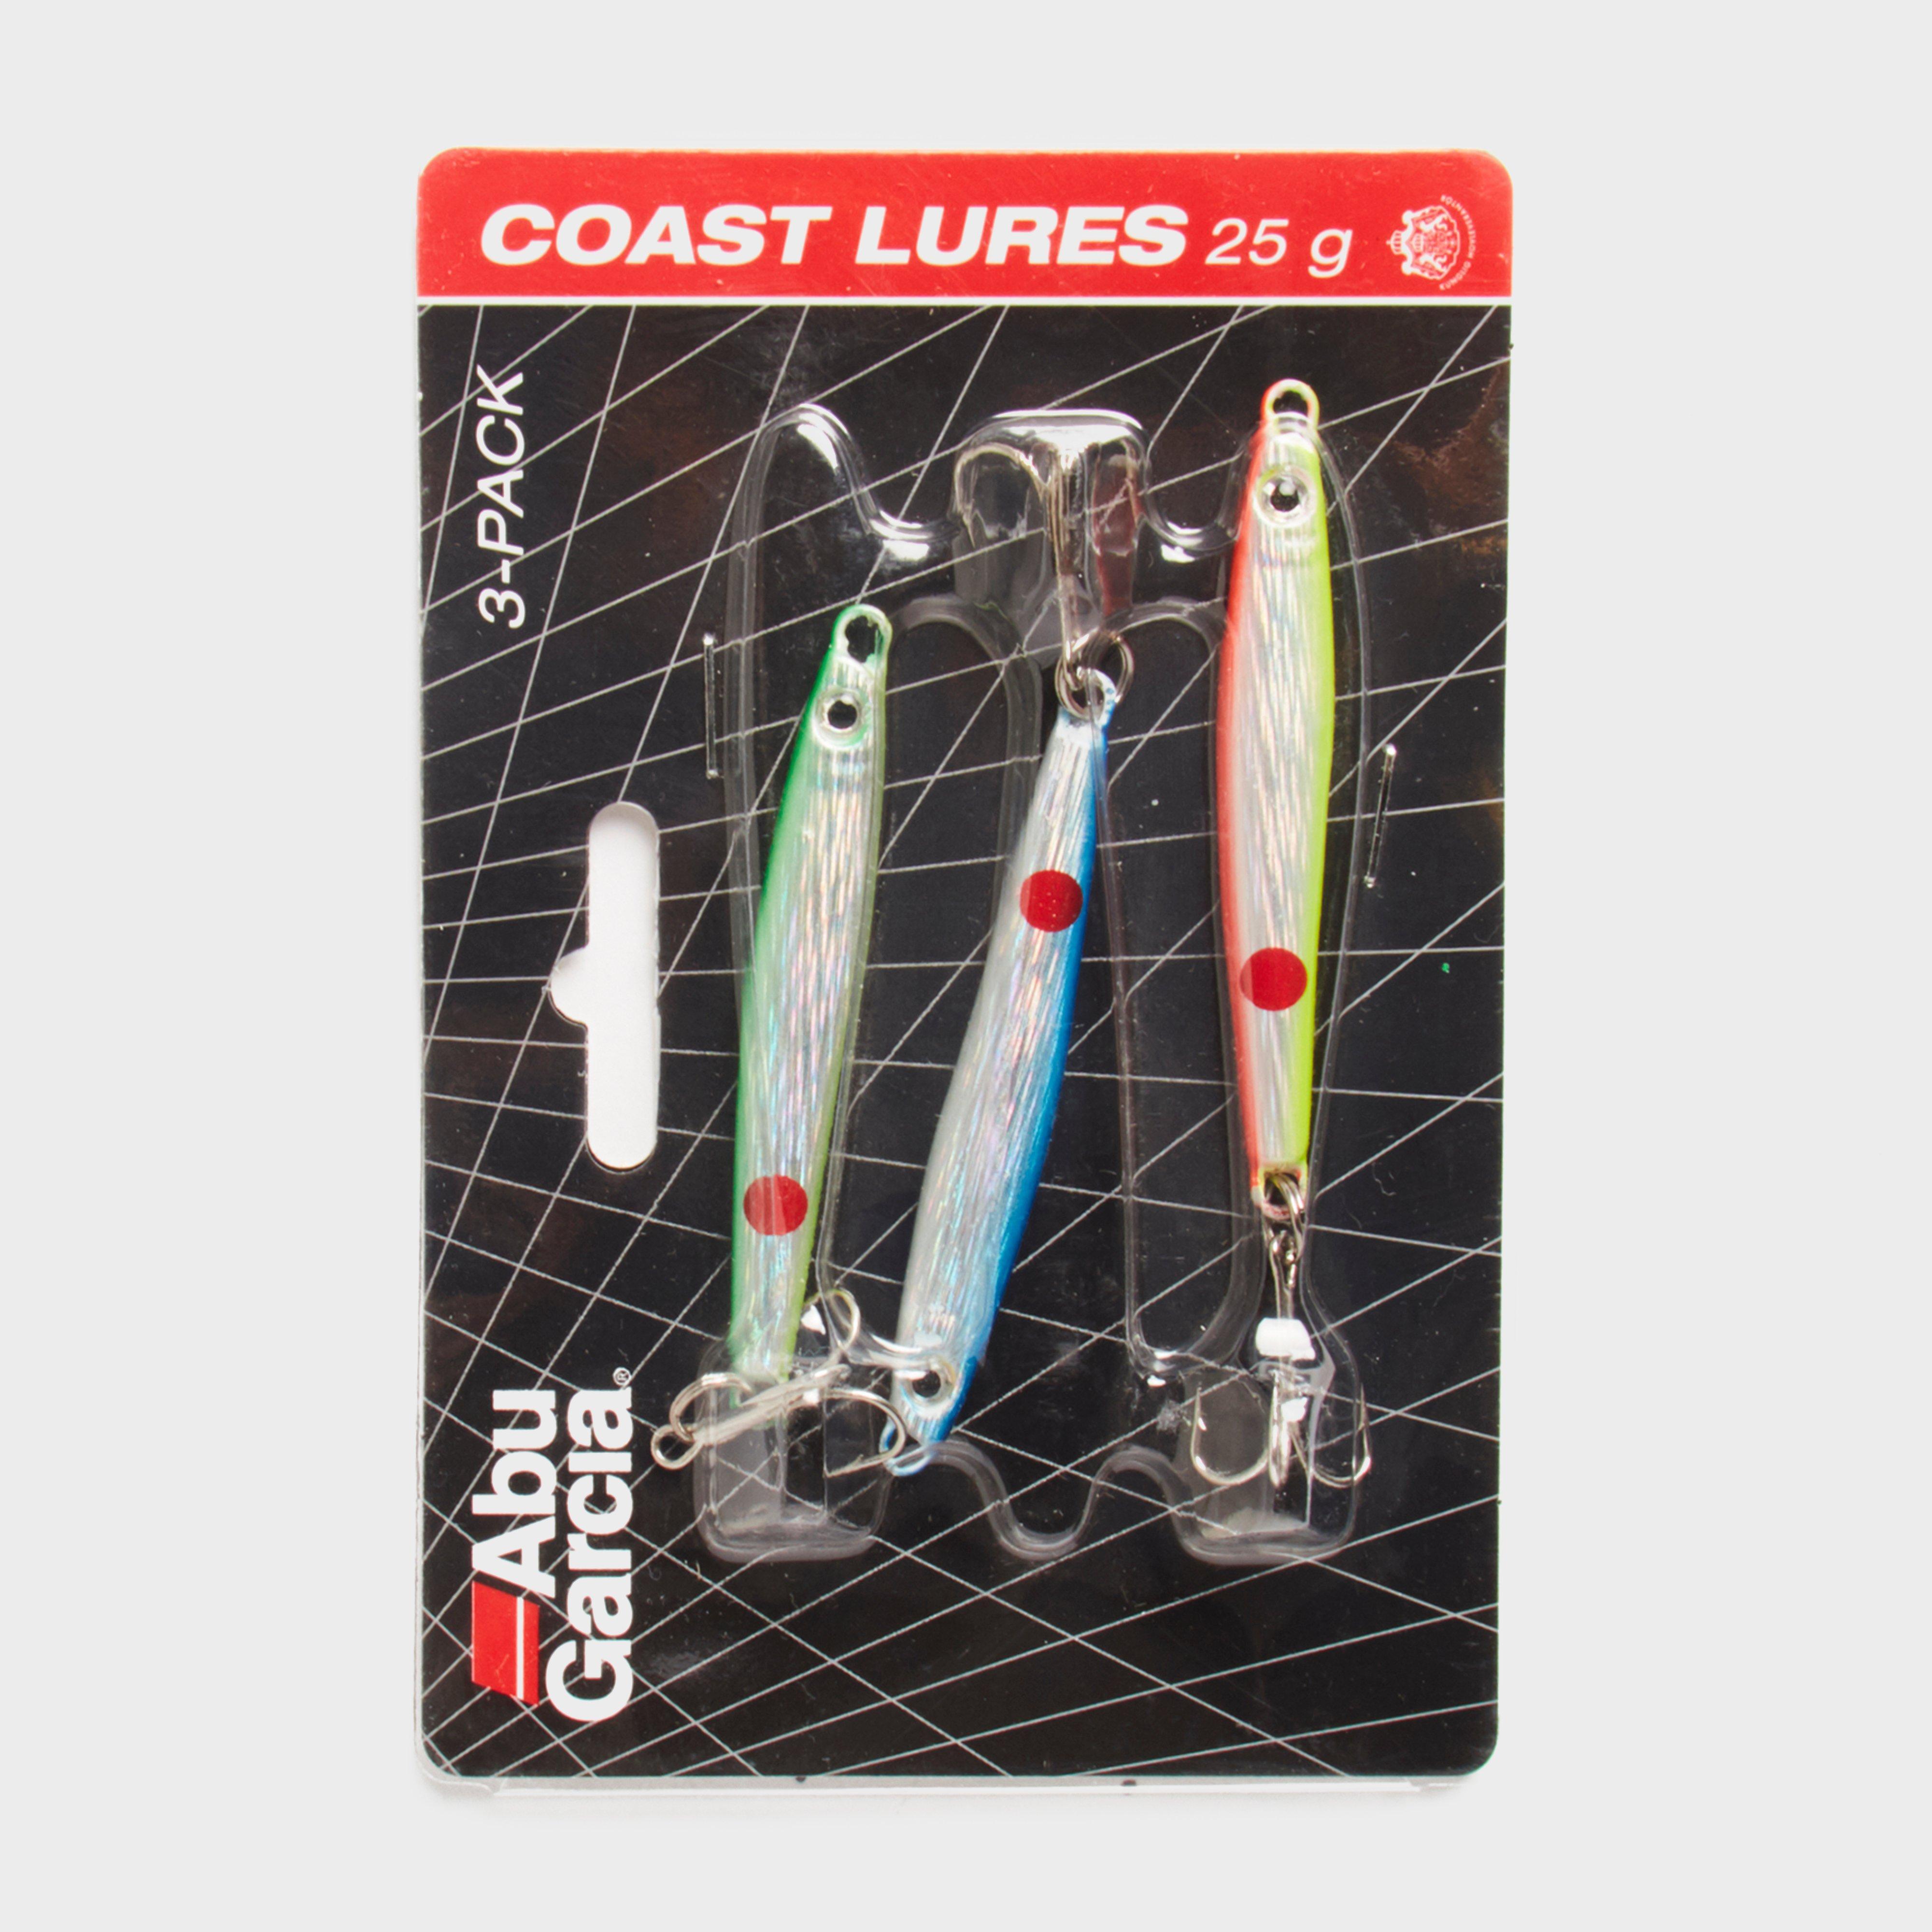 Abu Lures Assorted Coast Lures 25g Review